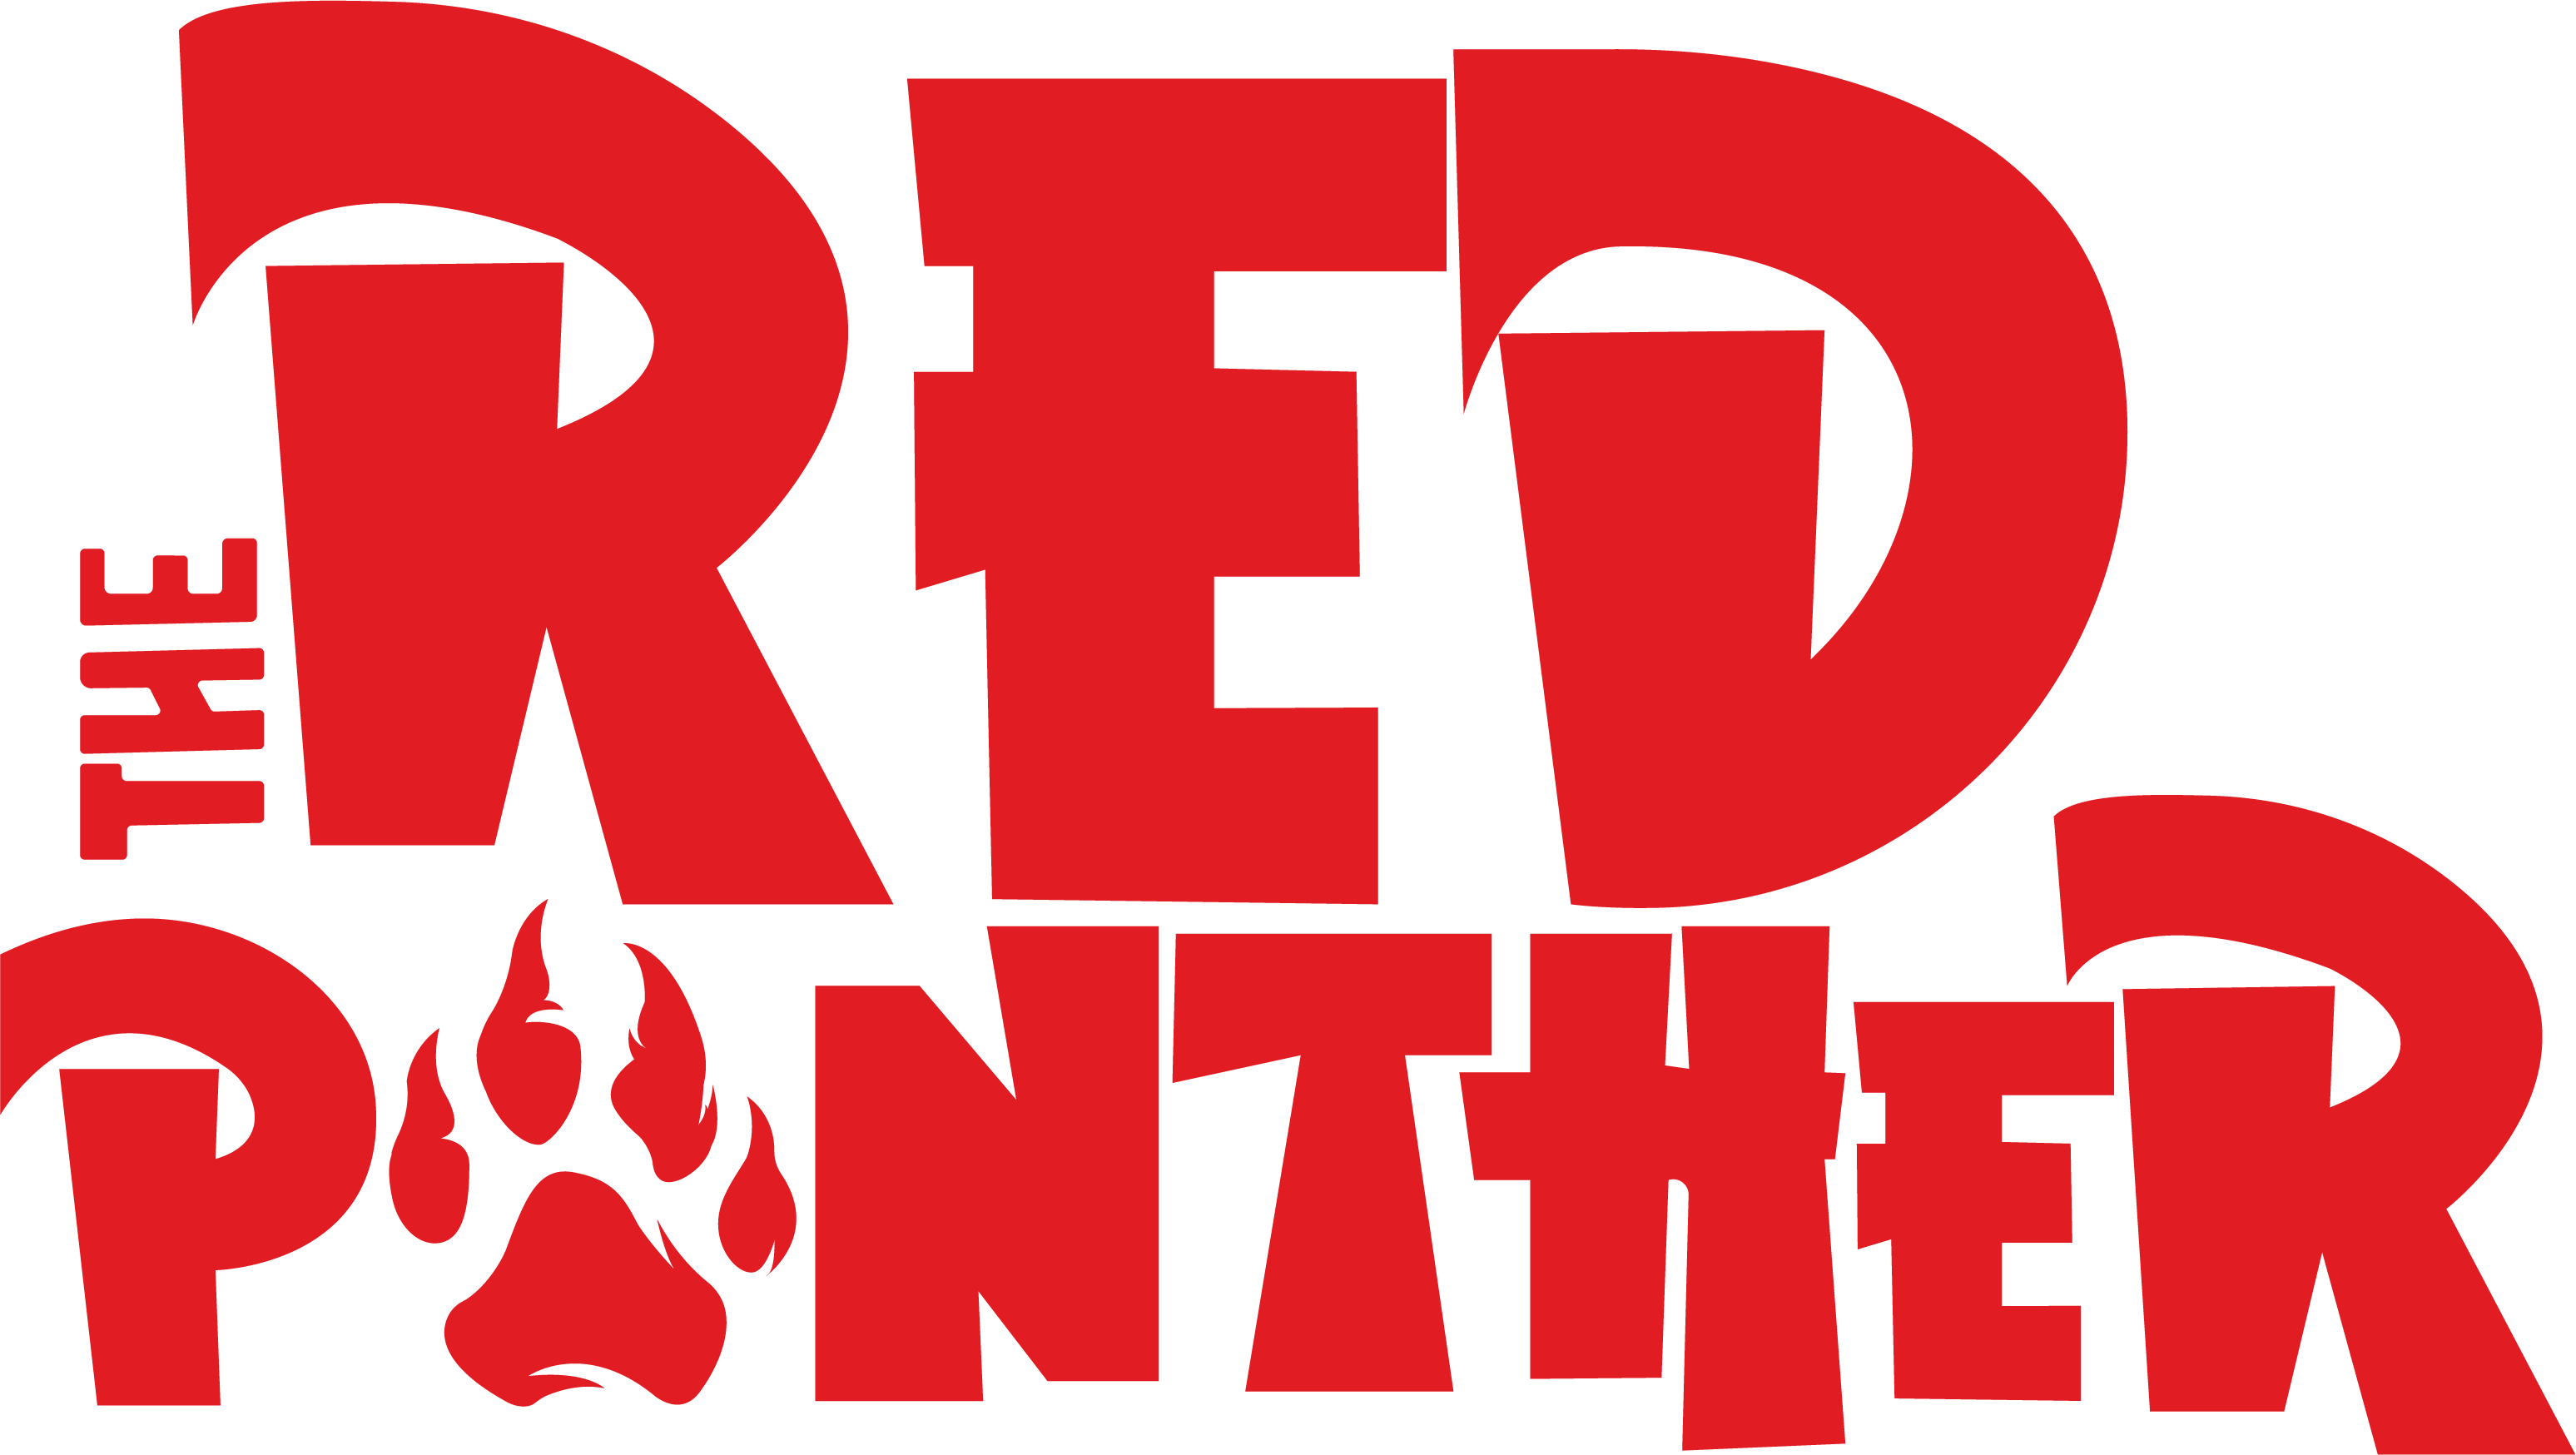 THE RED PANTHER